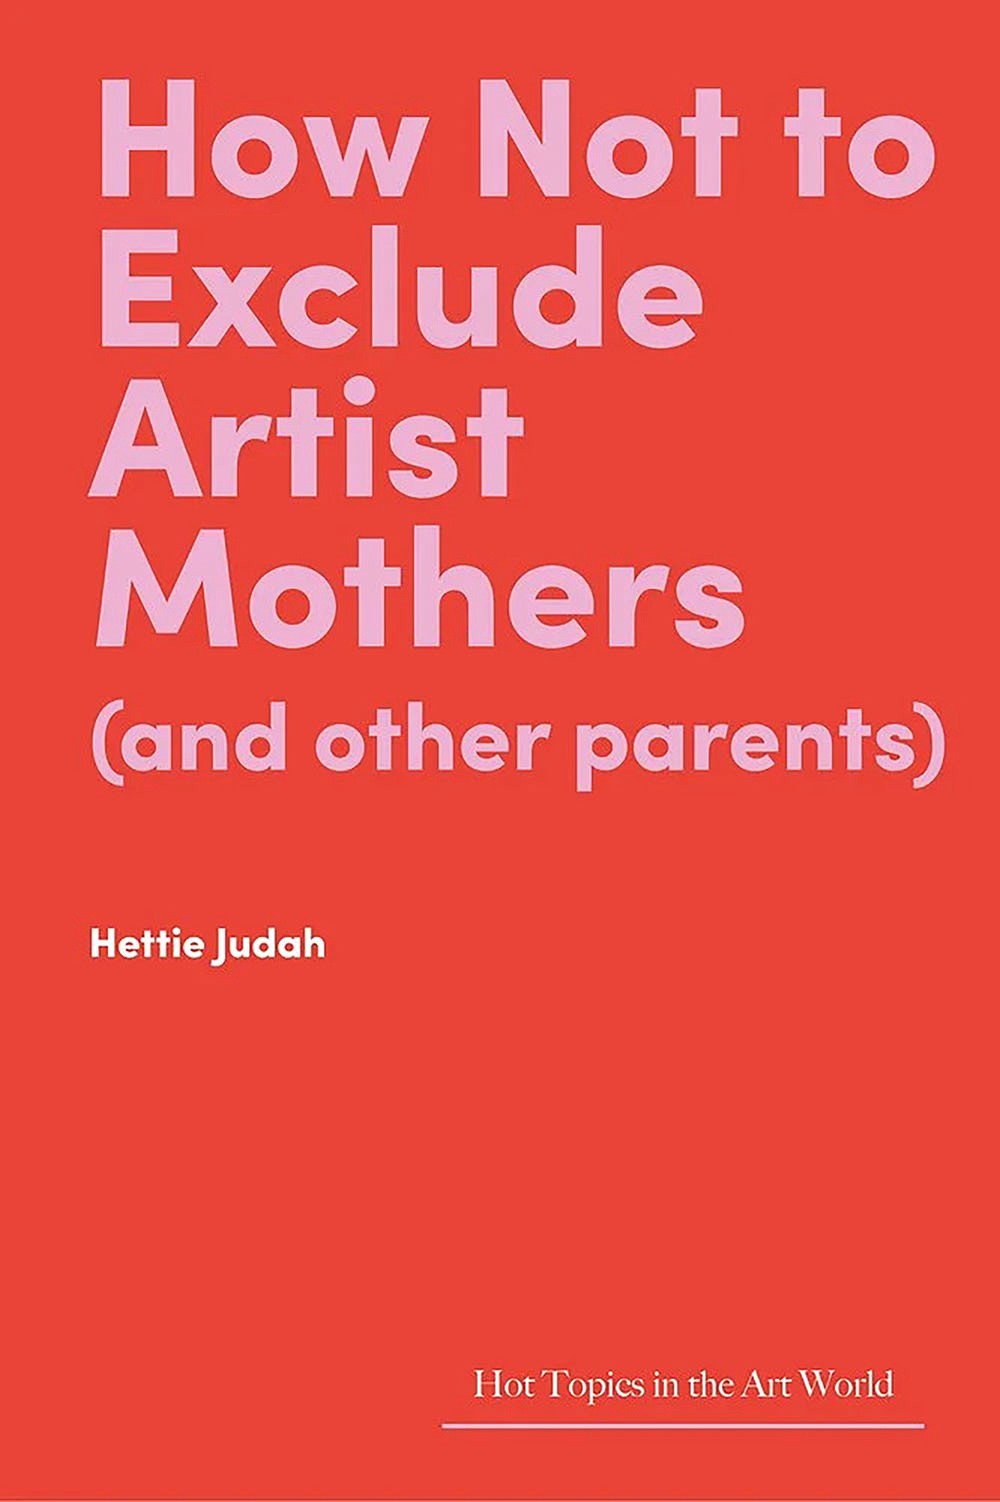 "How Not to Exclude Artist Mothers"